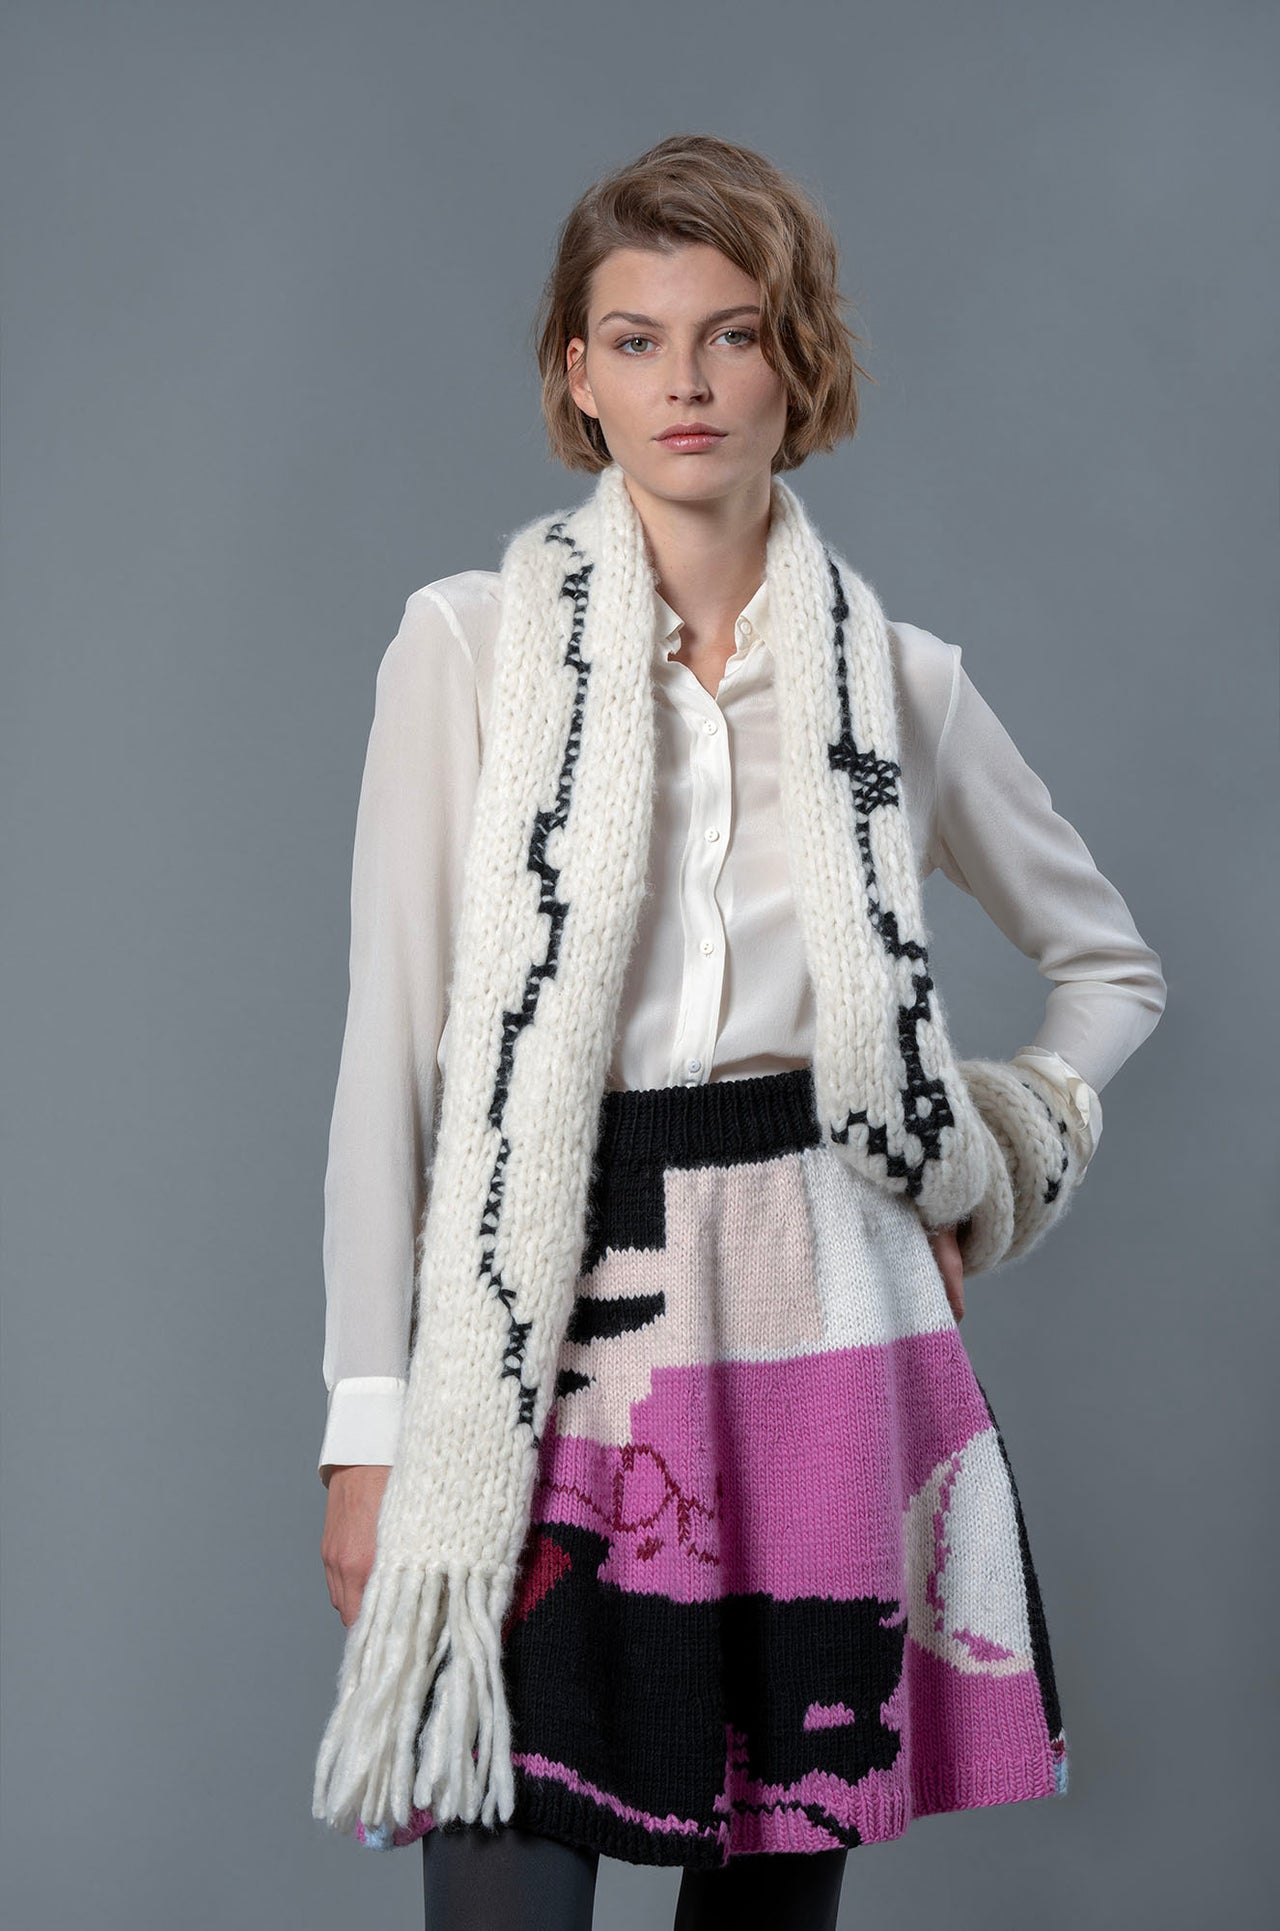 Woman wearing wool skirt and black and white wool scarf. The skirt has abstract colour block patterns in fuchsia, black, white, beige and a touch of burgundy.